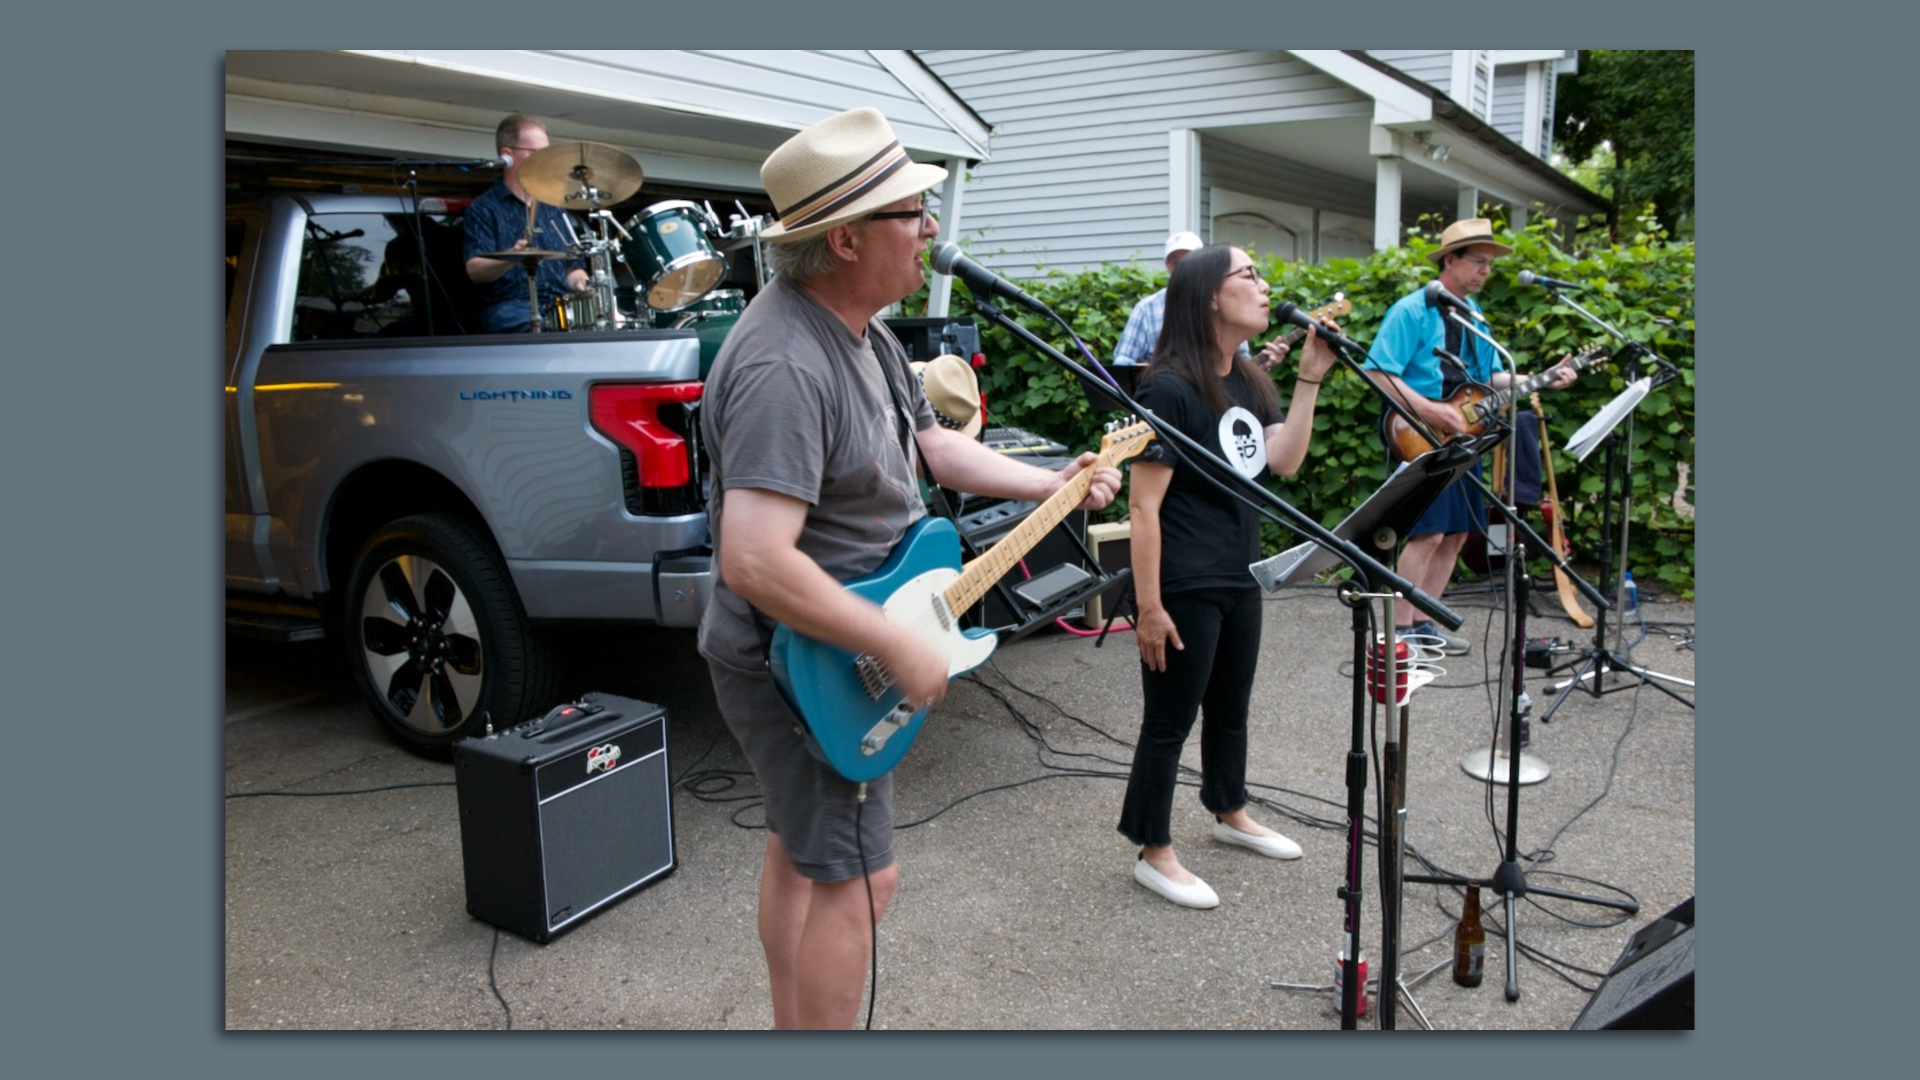 Members of the Exhaust Tones garage band, with amps and sound system powered by Ford's electric pickup truck